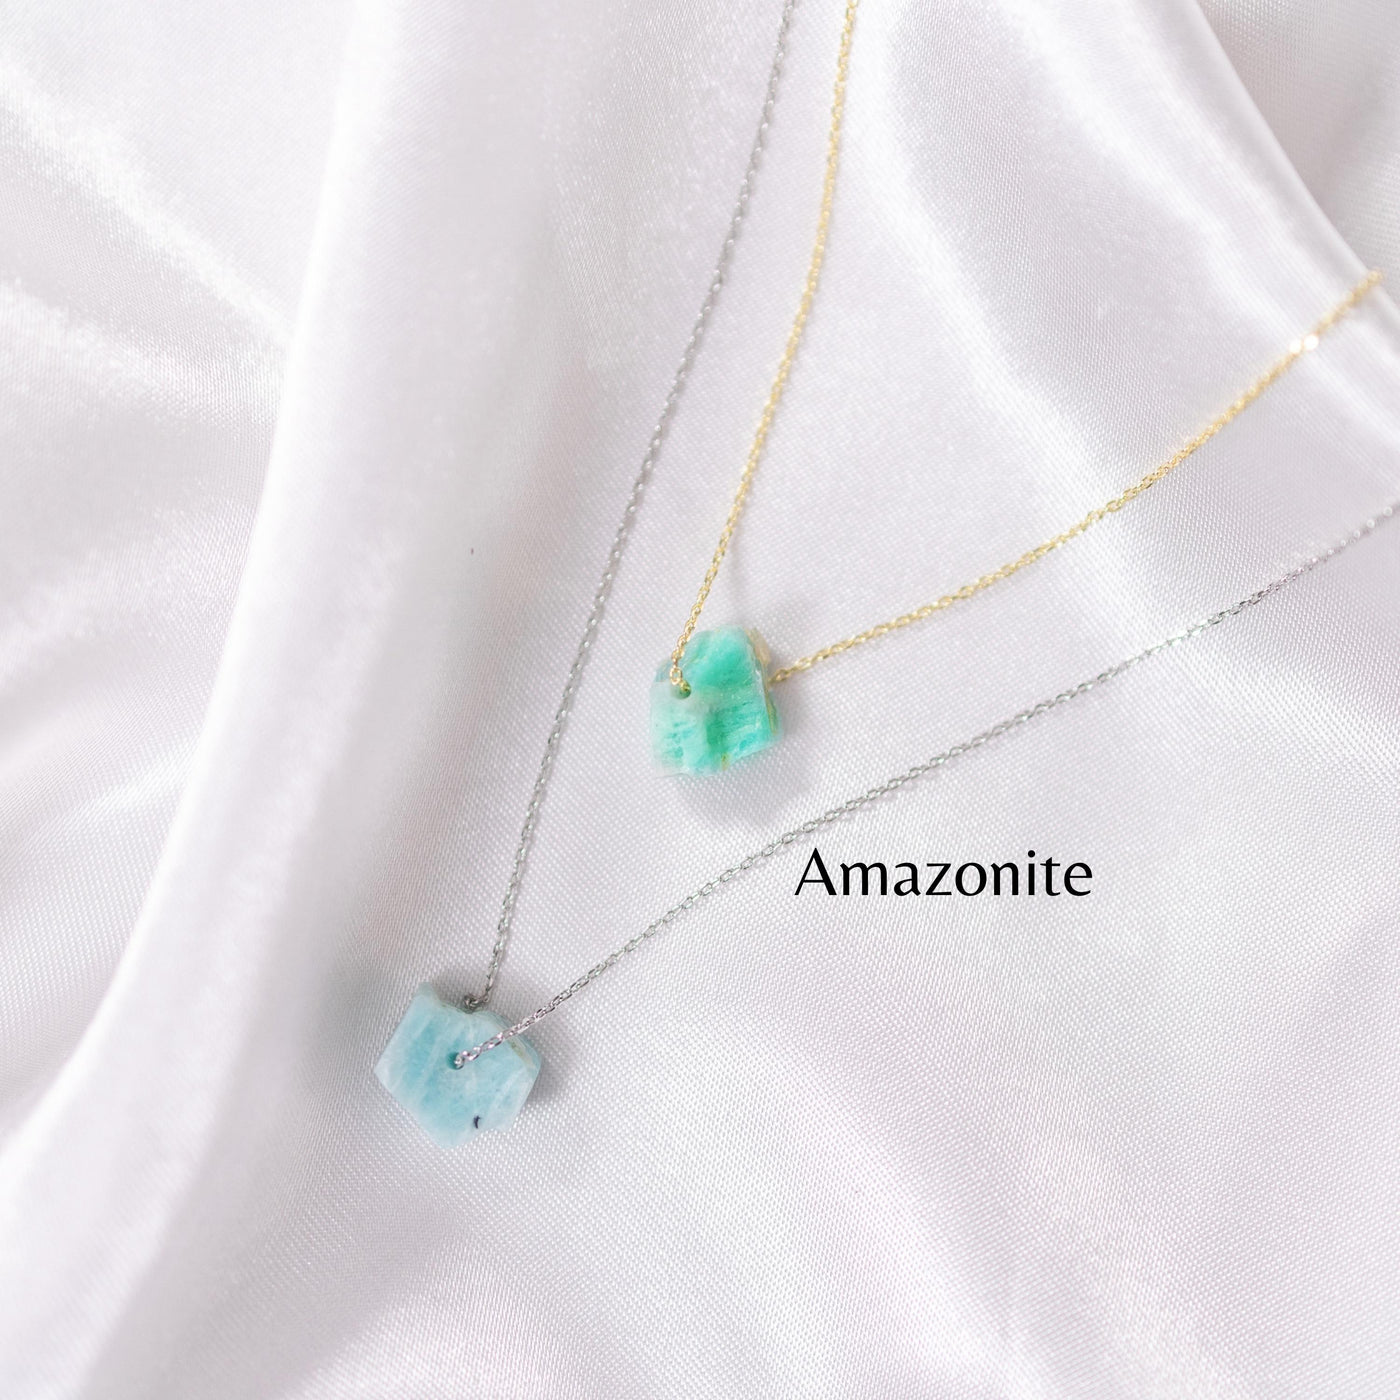 Shop Raw Amazonite Crystal Necklace 14K Gold, Sterling Silver, Minimalist Dainty Jewelry Necklace | Soul Charms